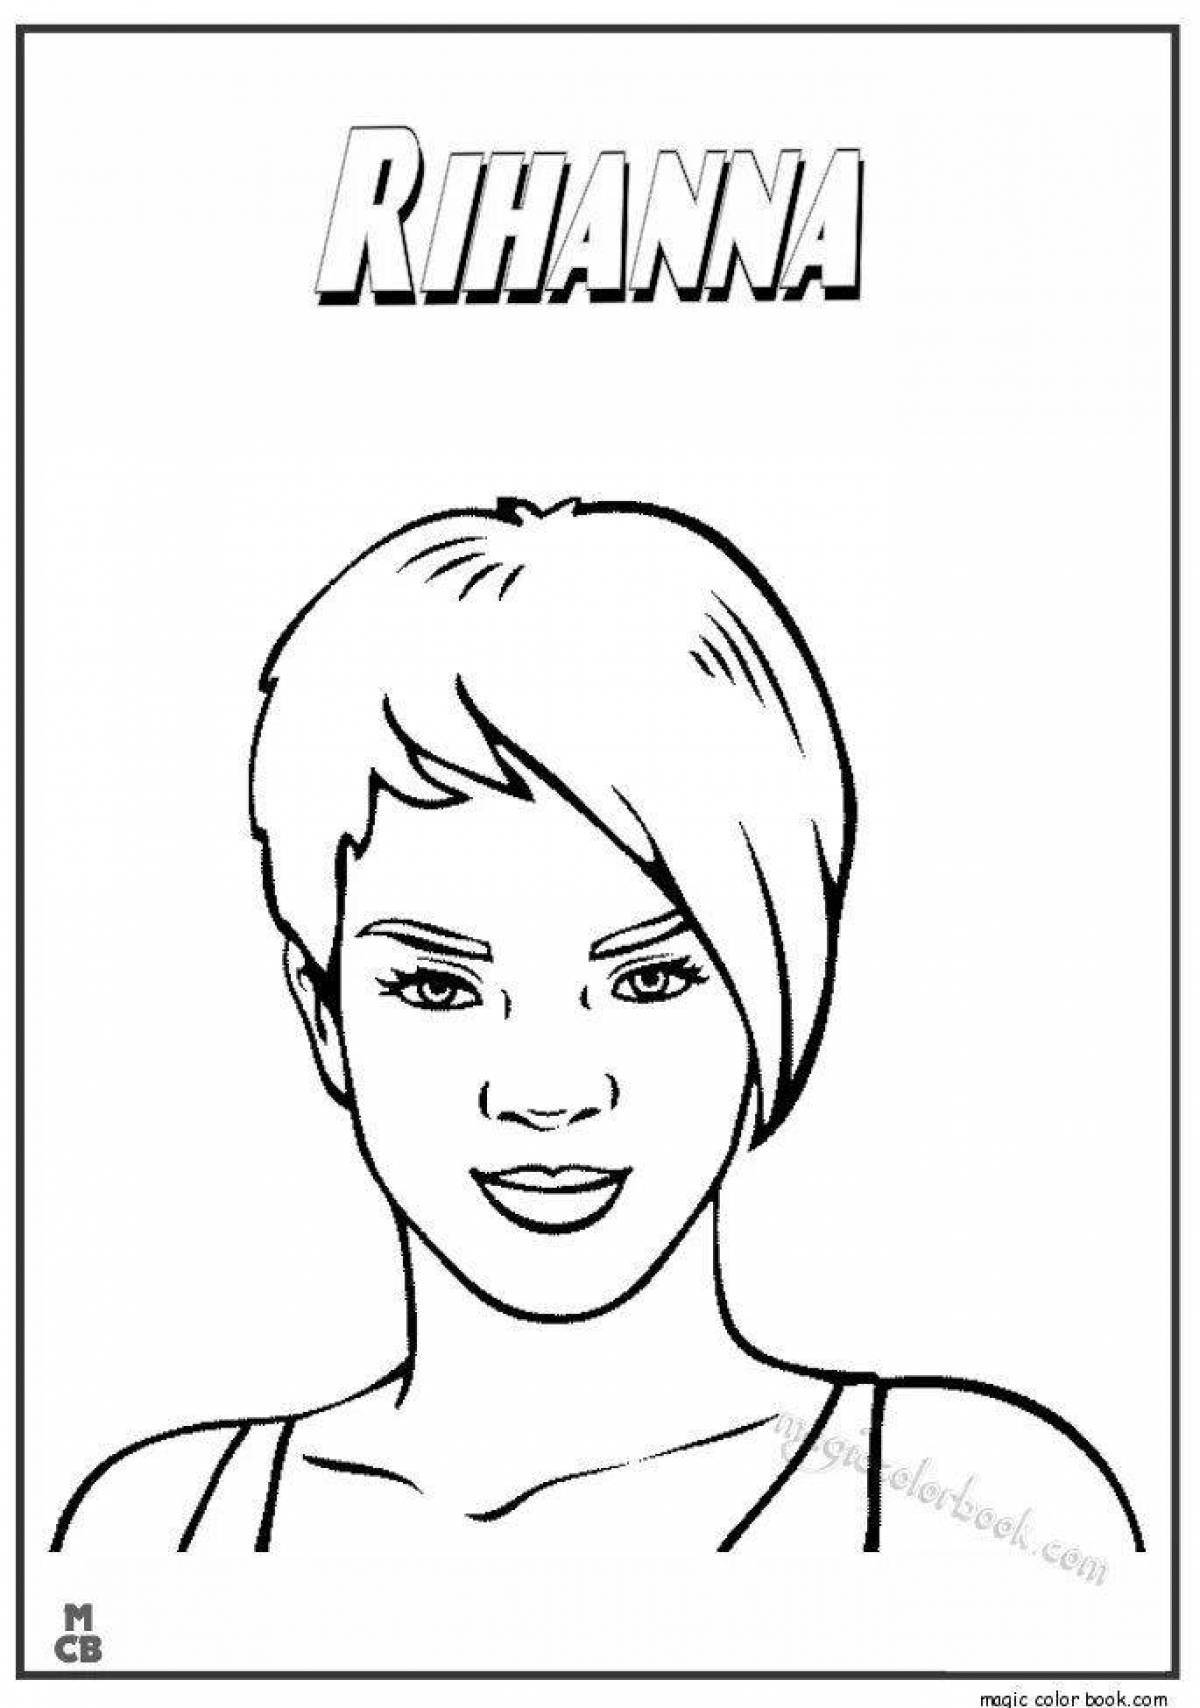 Rihanna's colorful coloring page